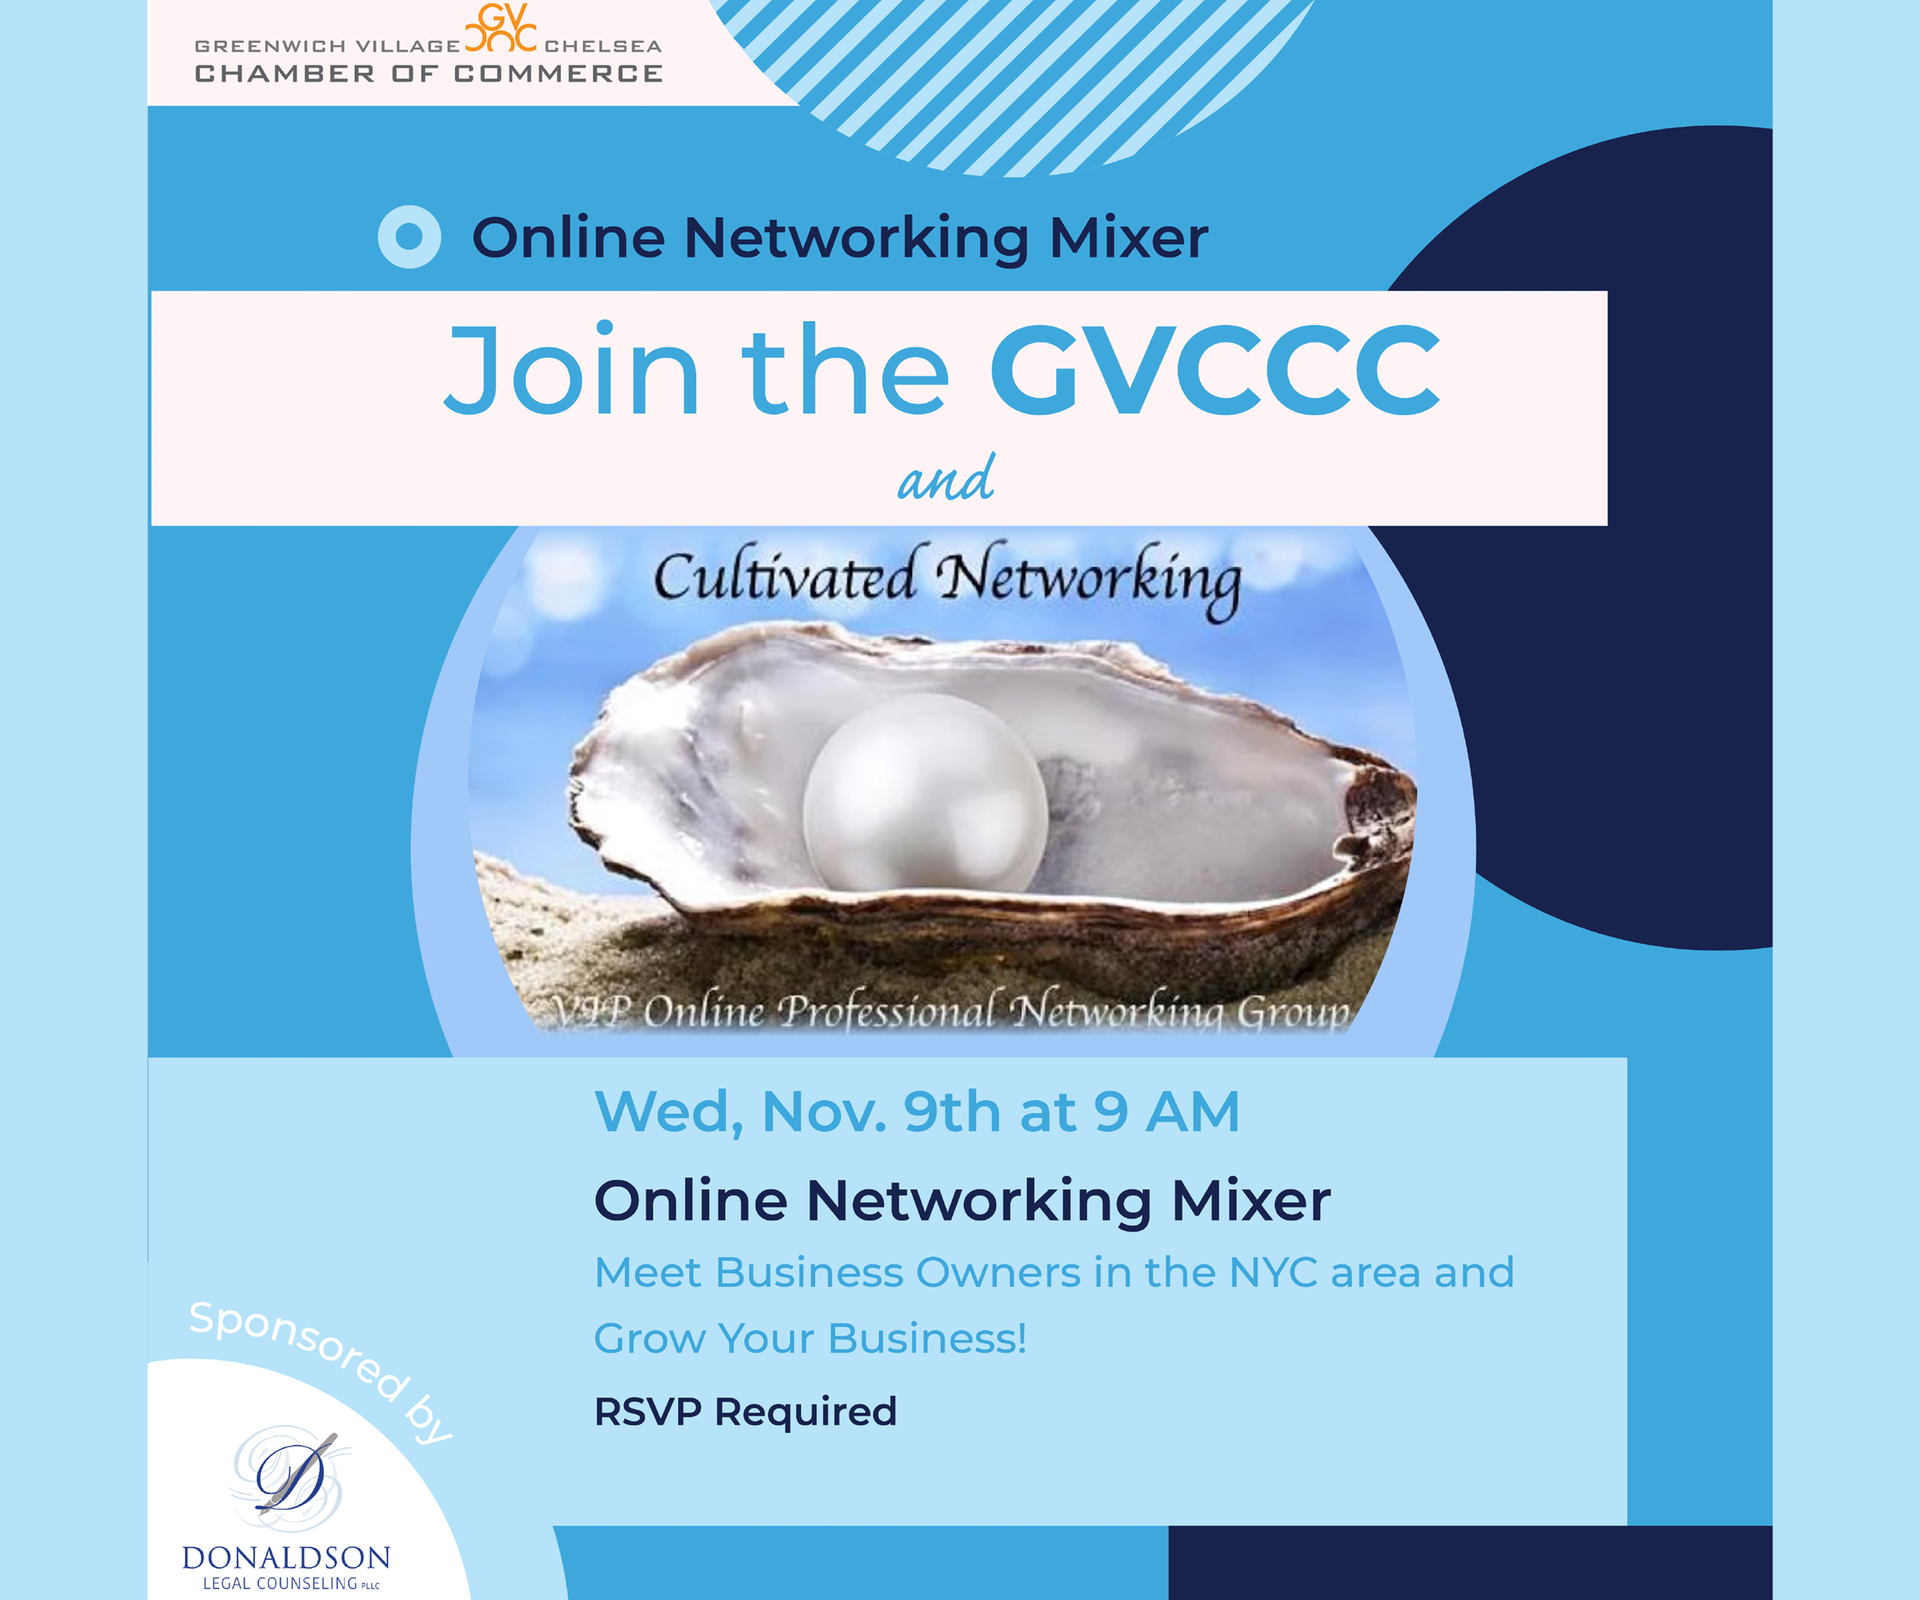 thumbnails GVCCC + Cultivated Networking Online Mixer